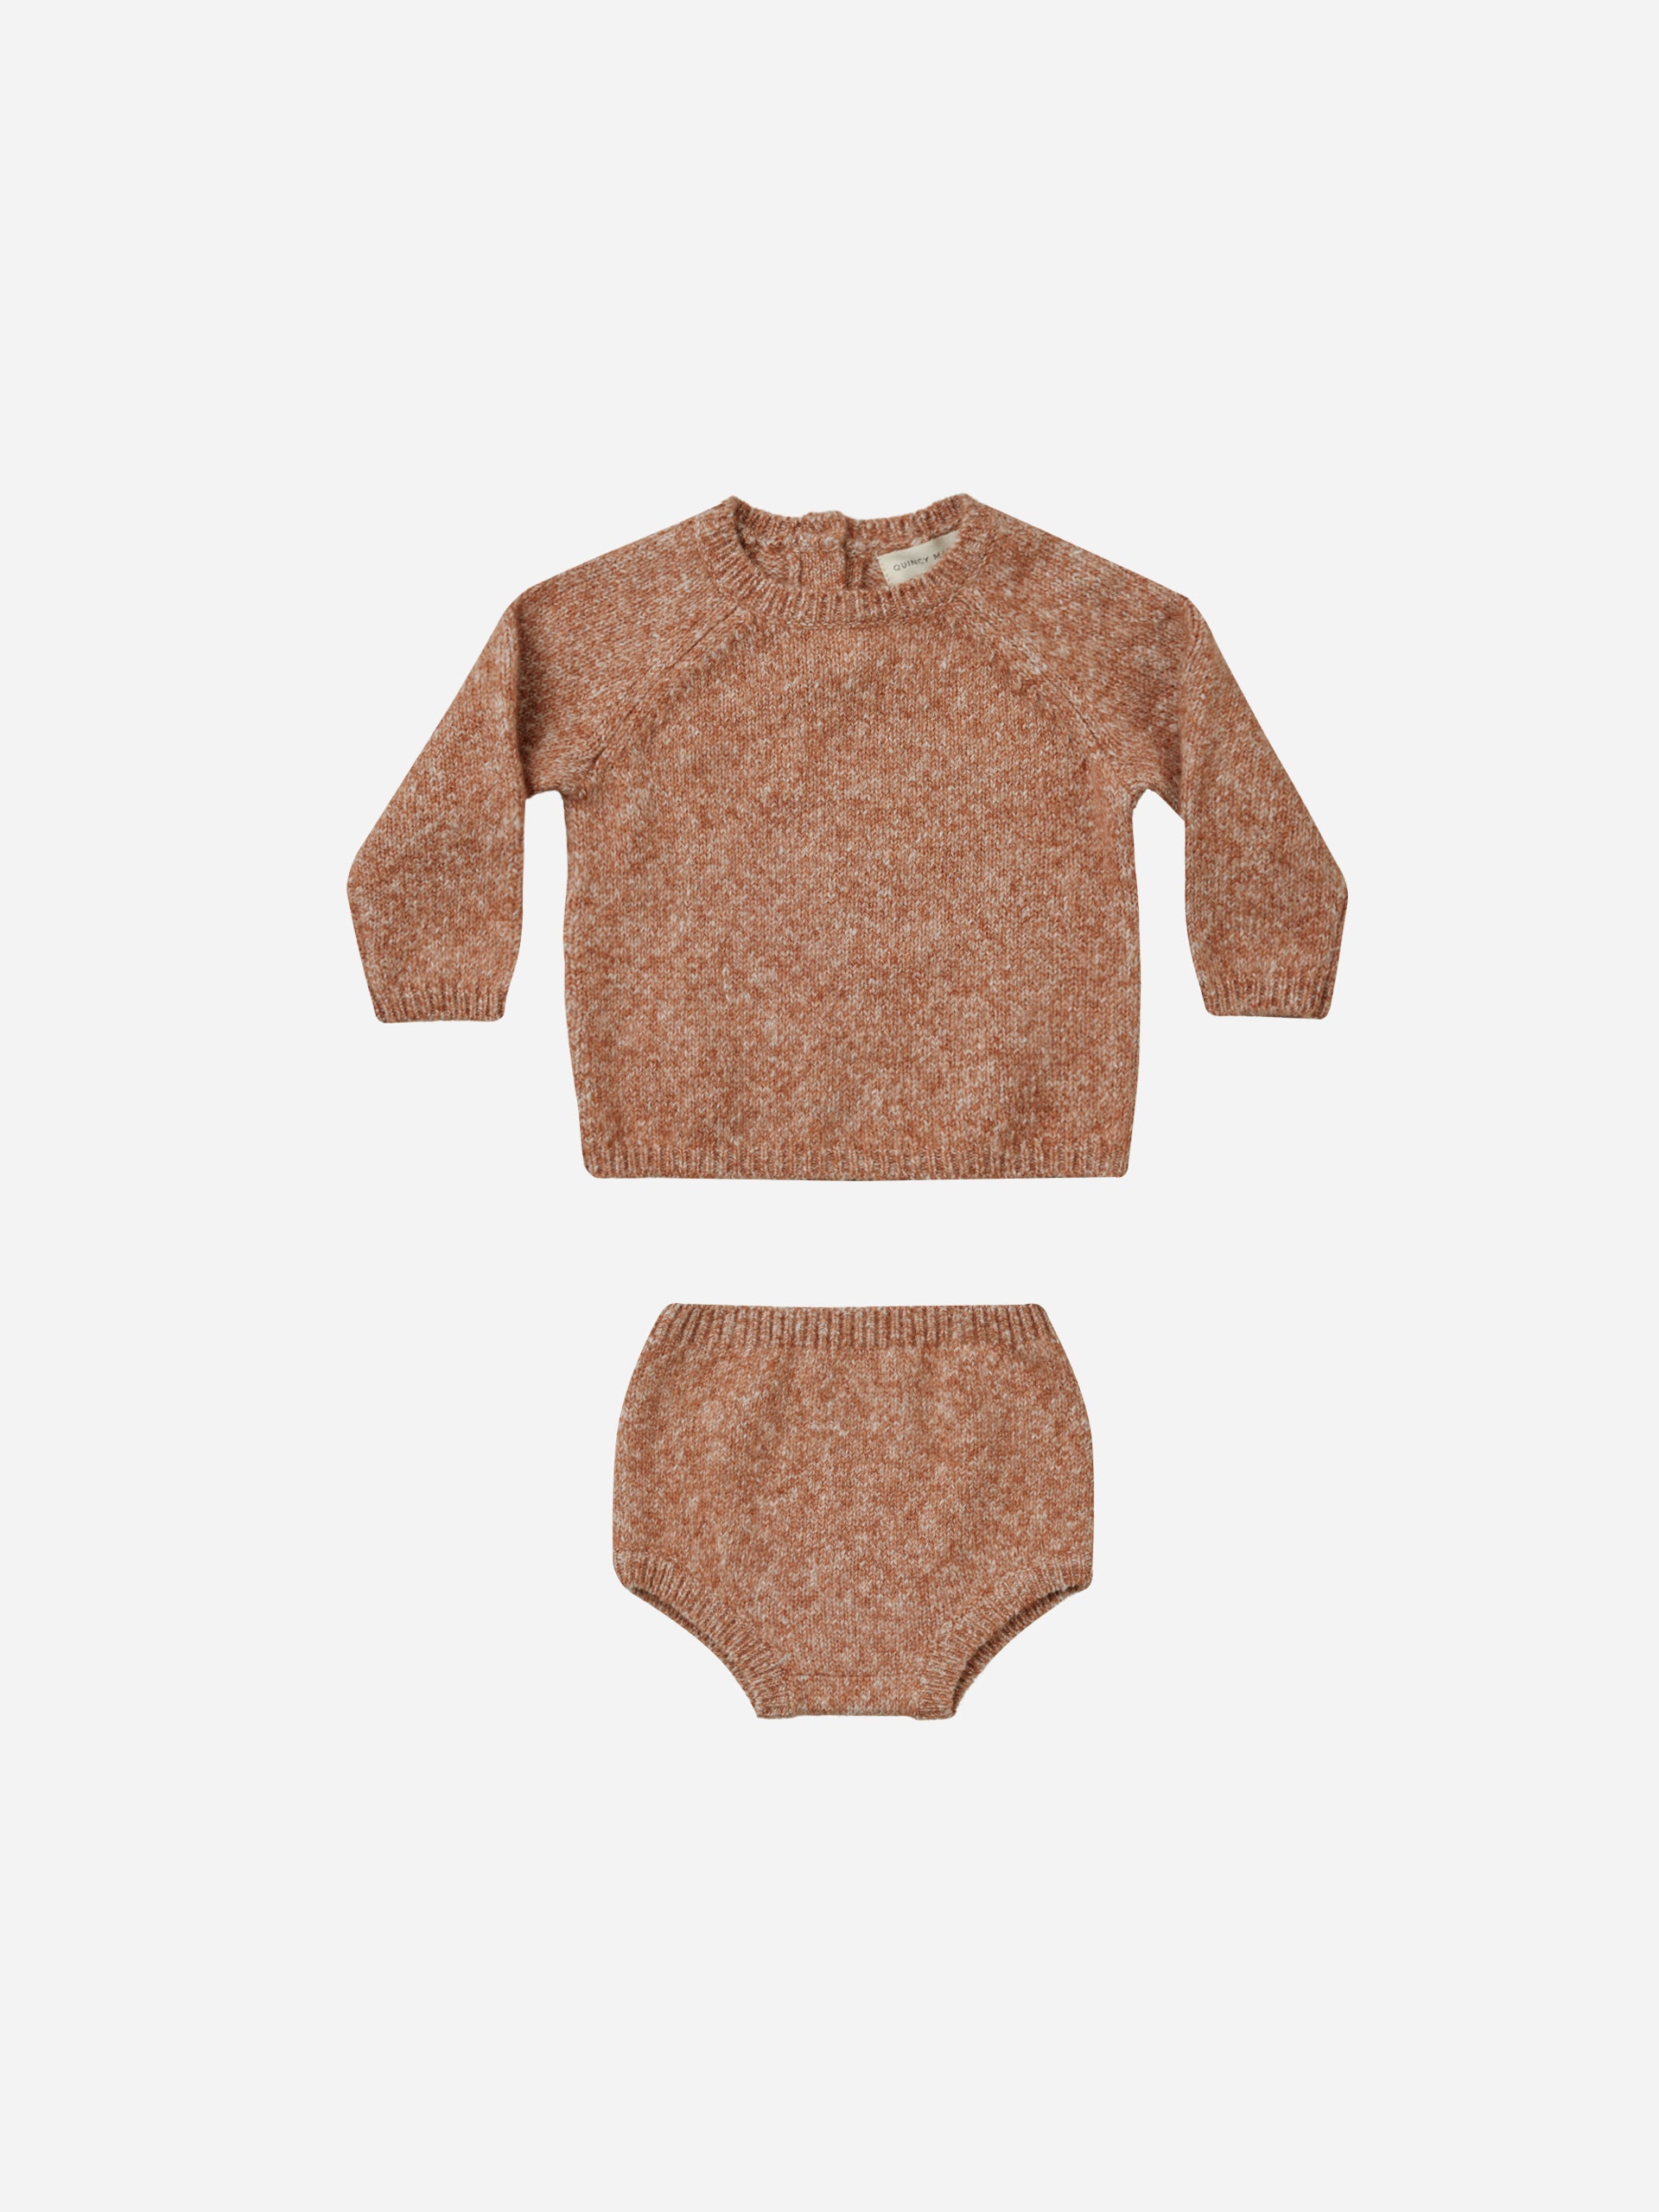 Bailey Knit Set || Heathered Clay - Rylee + Cru | Kids Clothes | Trendy Baby Clothes | Modern Infant Outfits |